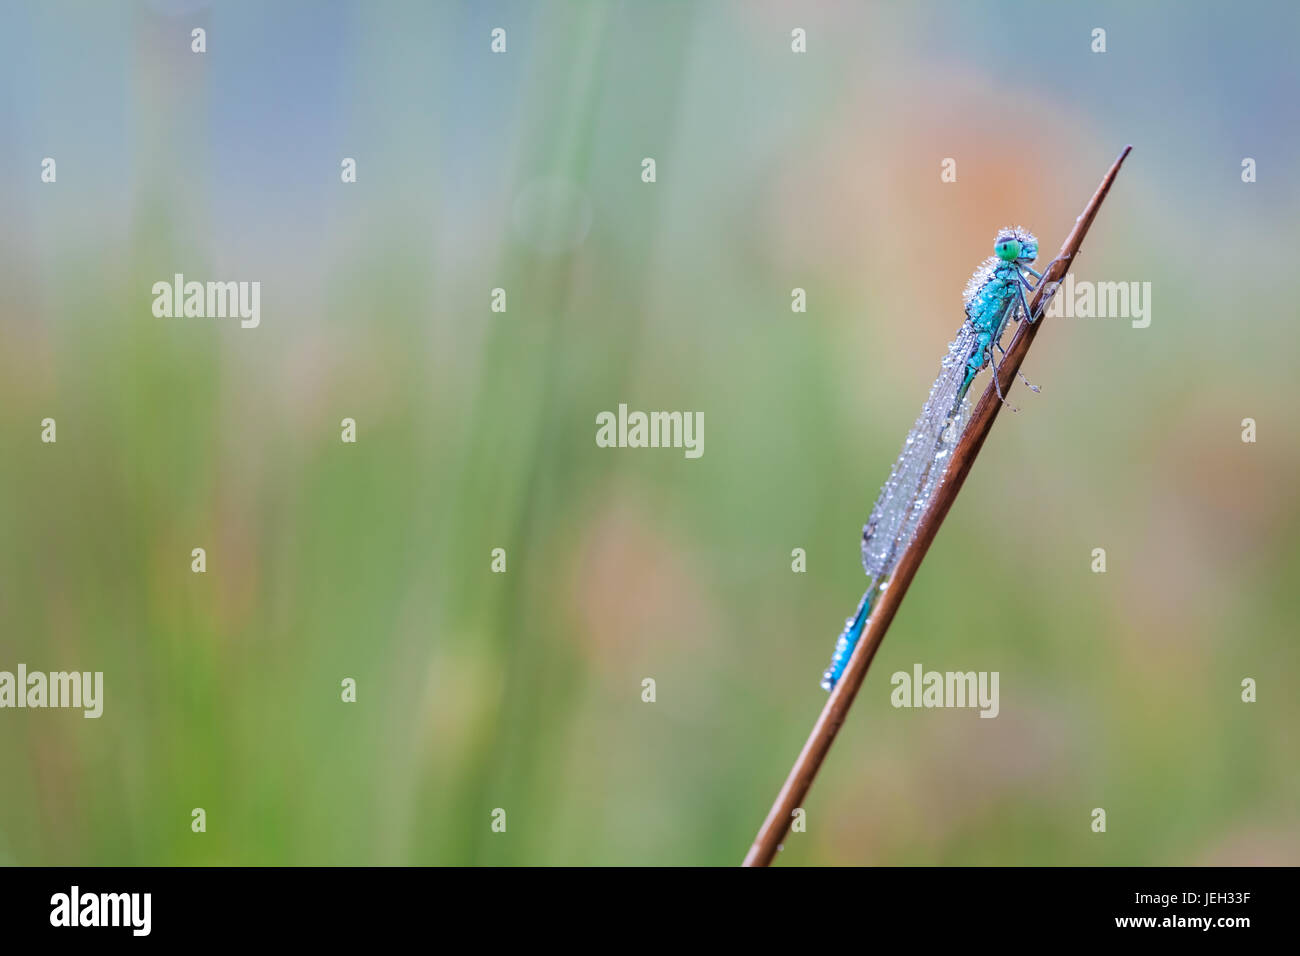 On a stick of a plant there is a goblet-marked damselfly whit dew on the wings Stock Photo